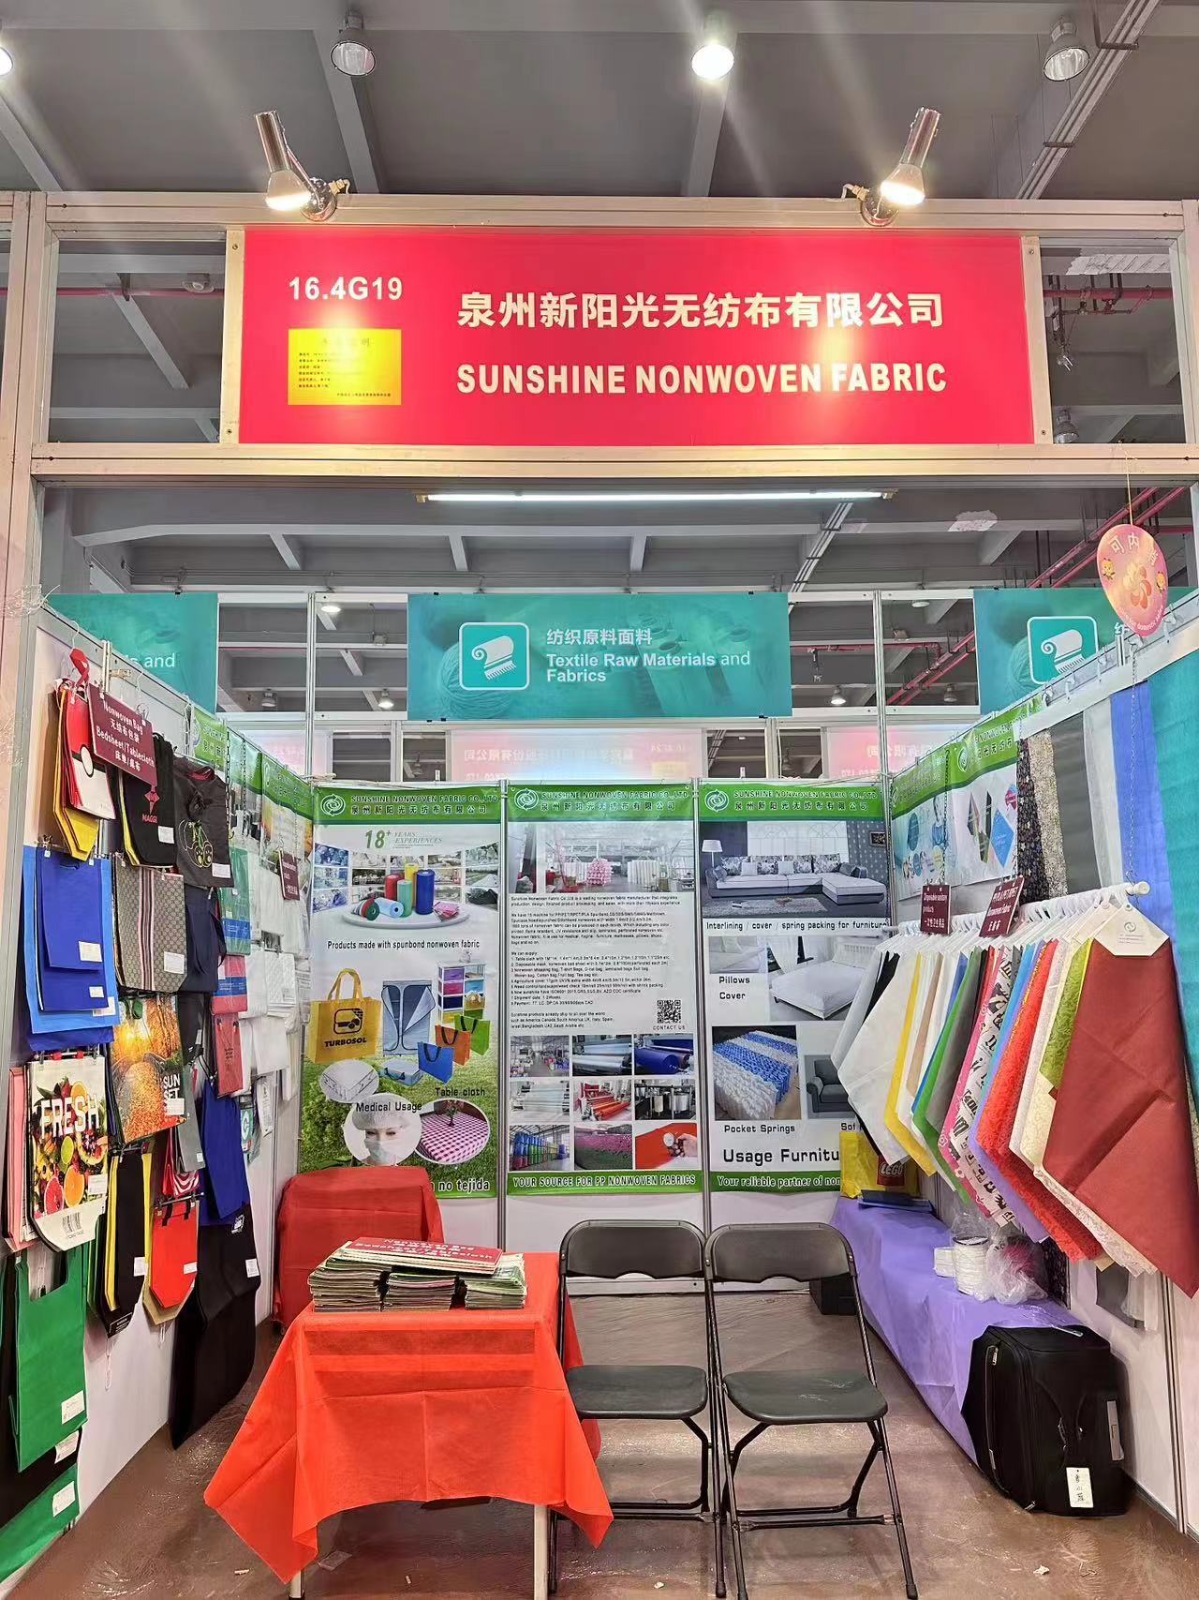 Welcome to the 134th Canton Fair